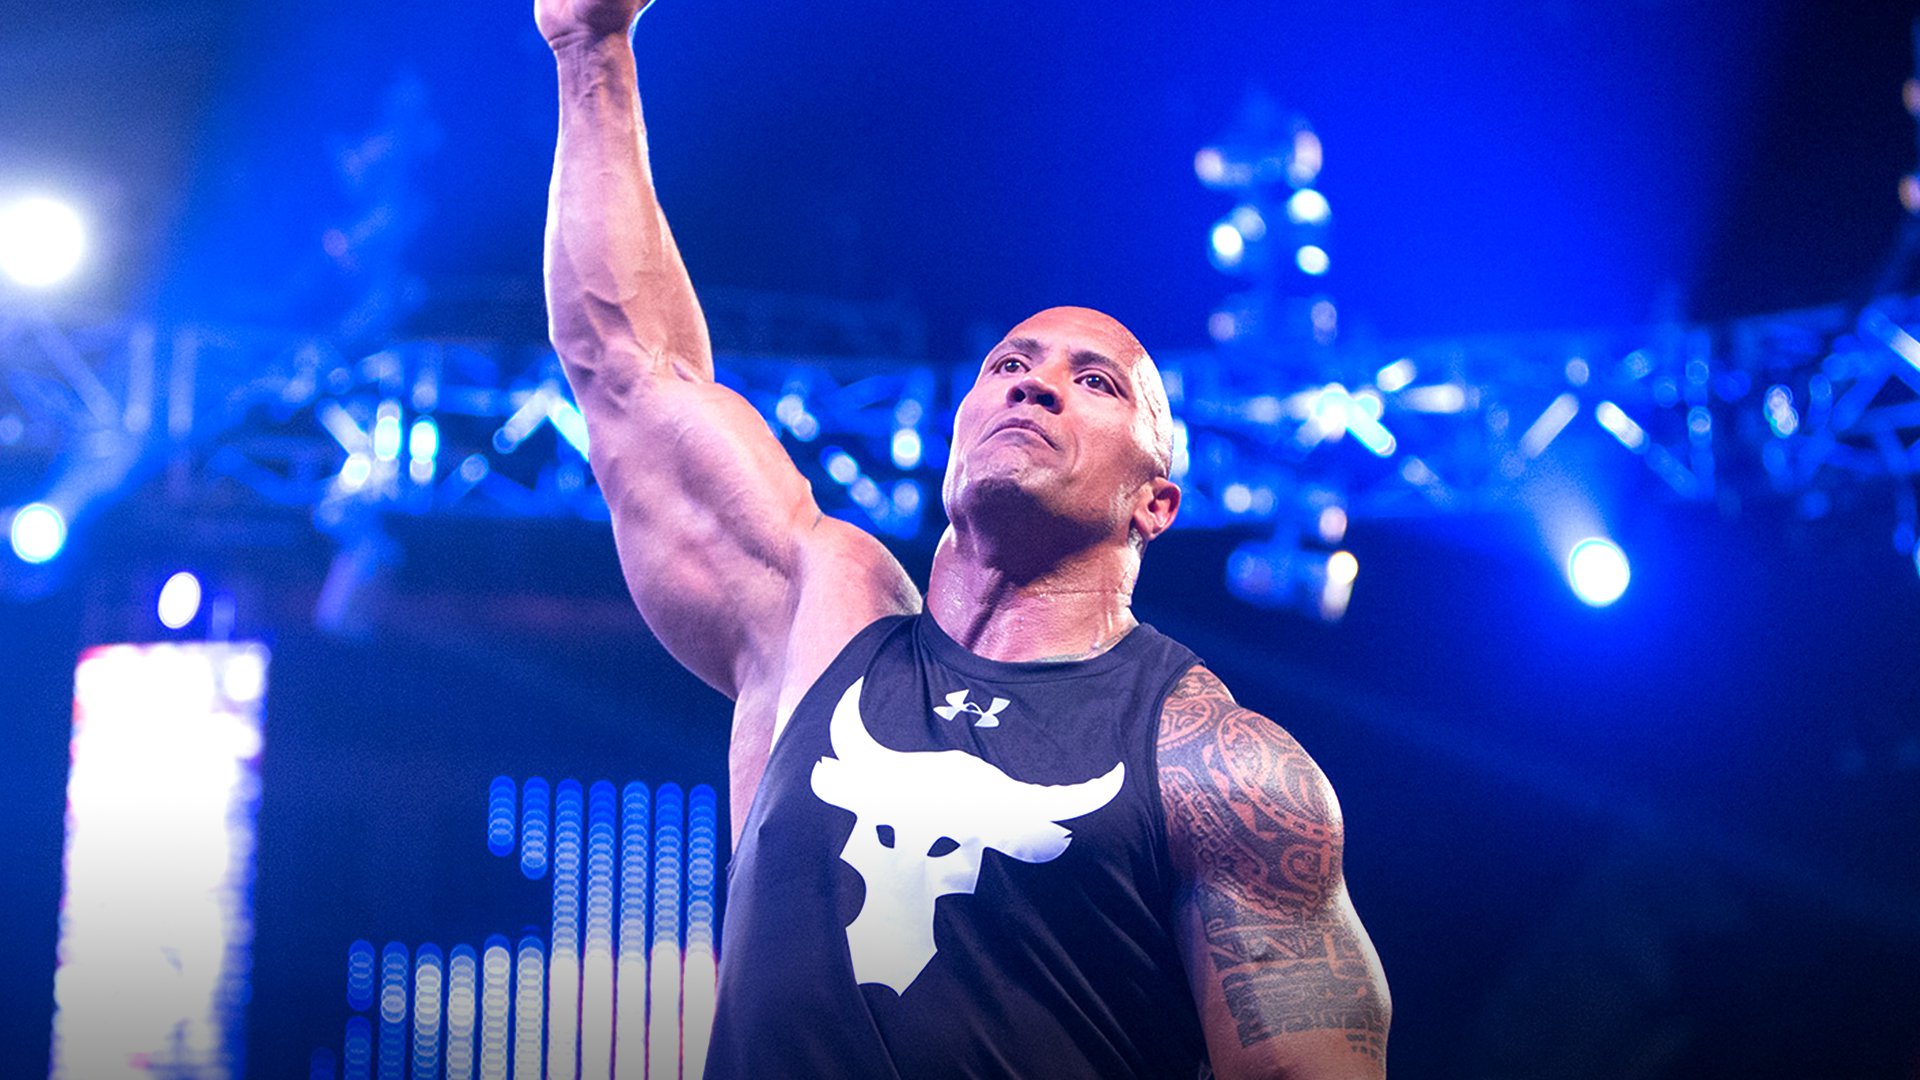 The Rock and Other Surprise Guests on Tonight's WWE SmackDown?